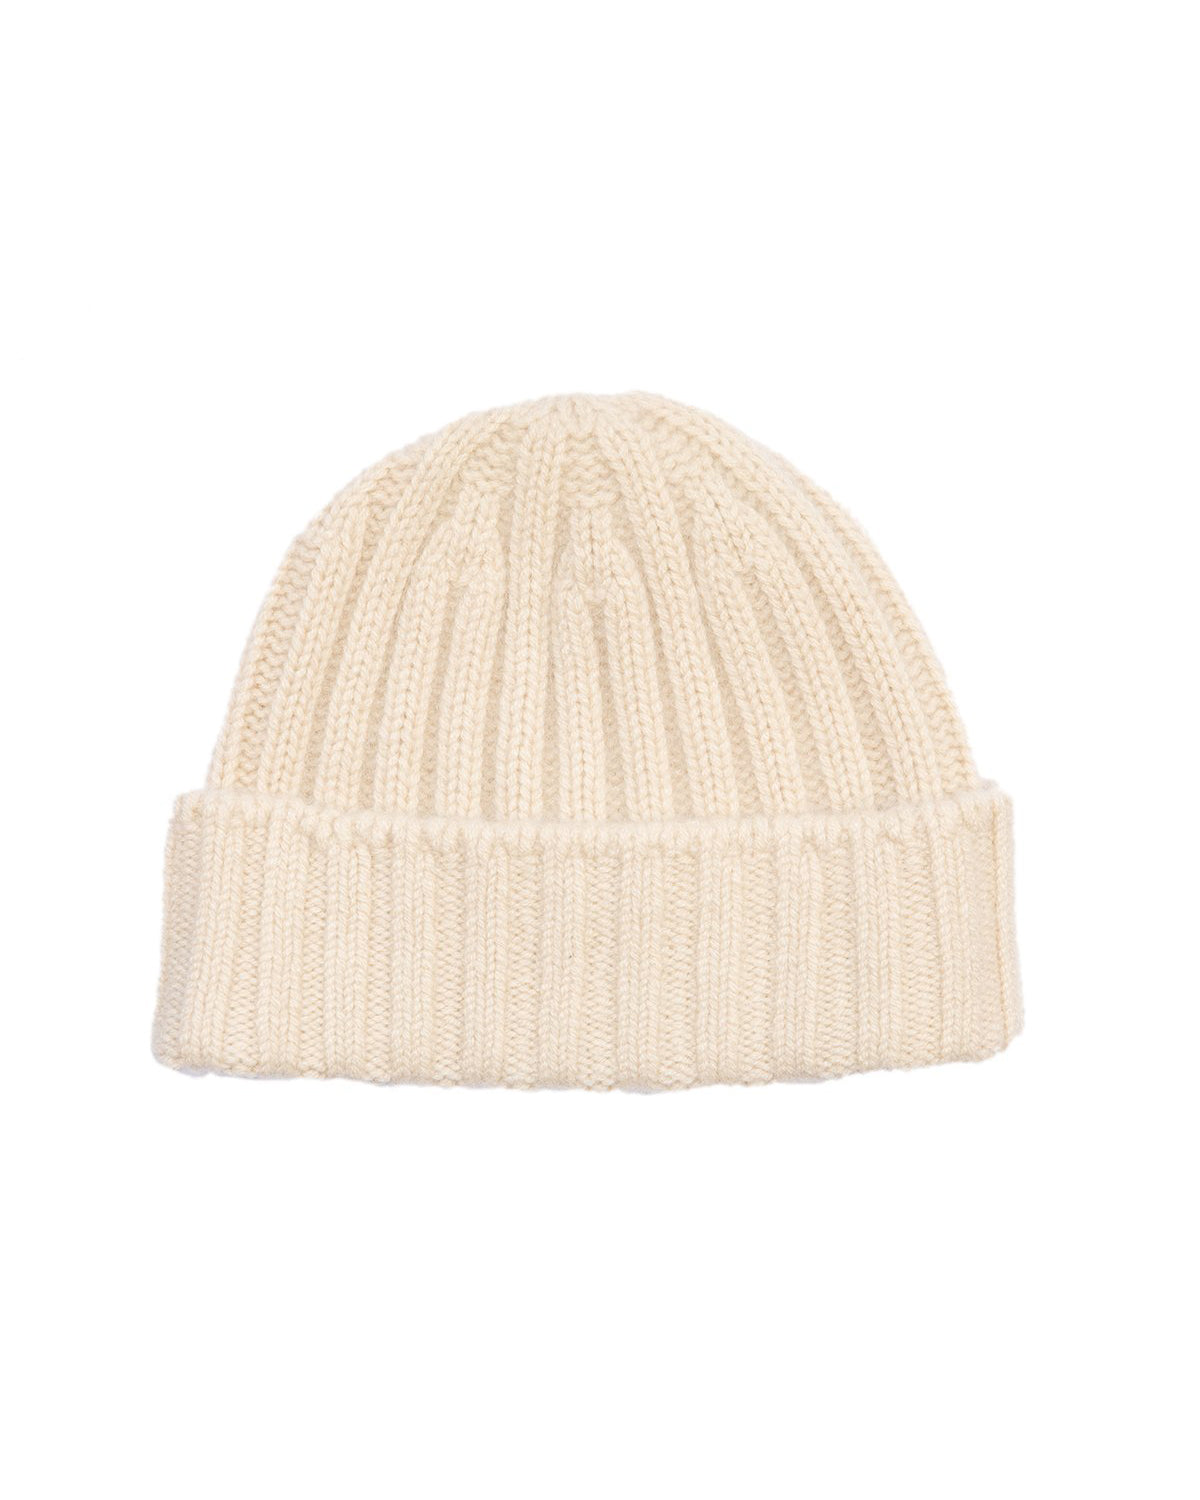 Knit Cap in Cashmere 2x2 Rib - Ivory